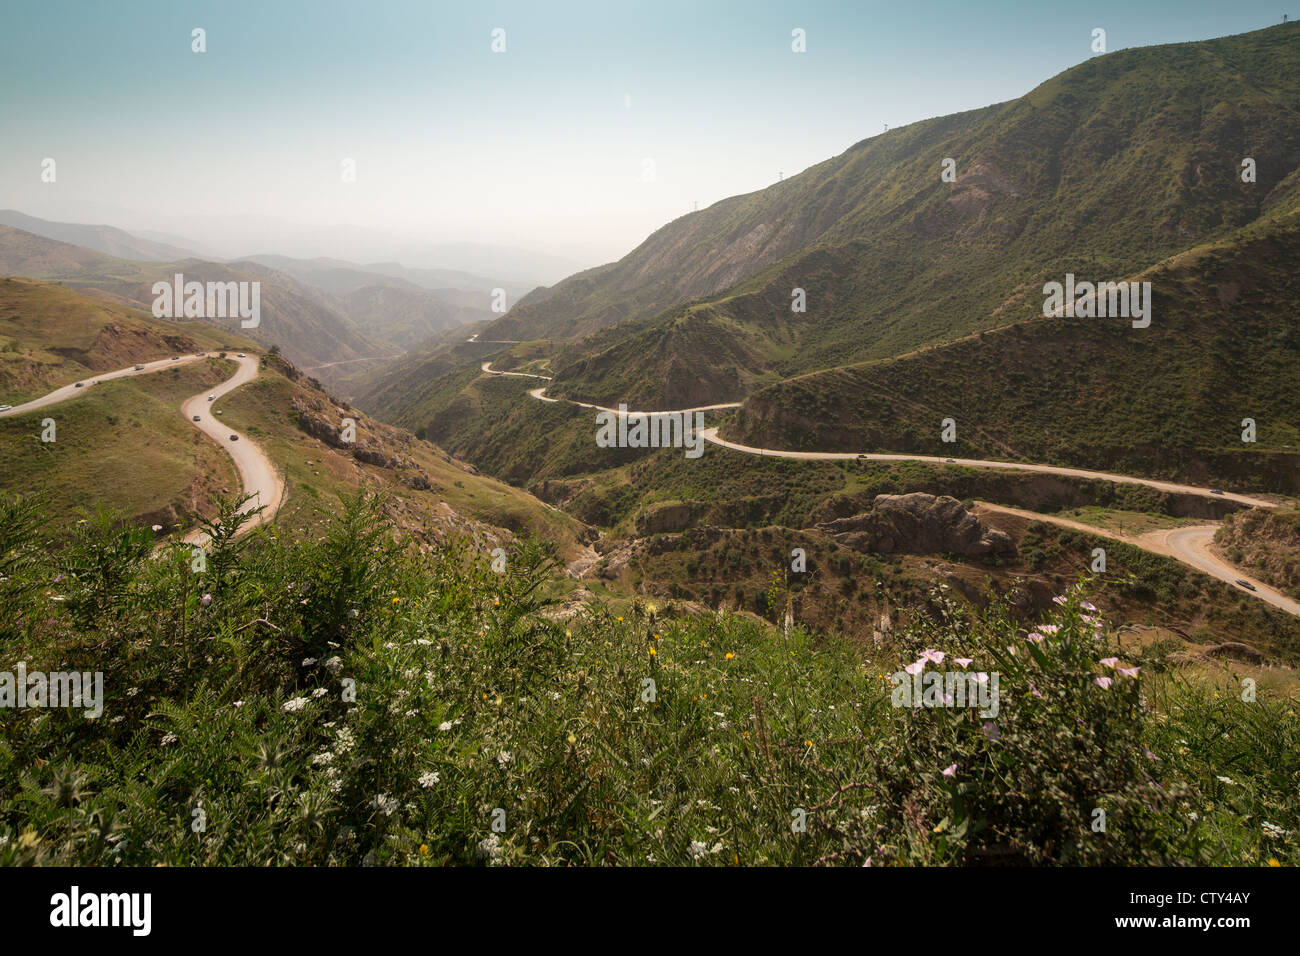 view of mountain road with haripin bends, Dushanbe Holbok road, Tajikistan Stock Photo